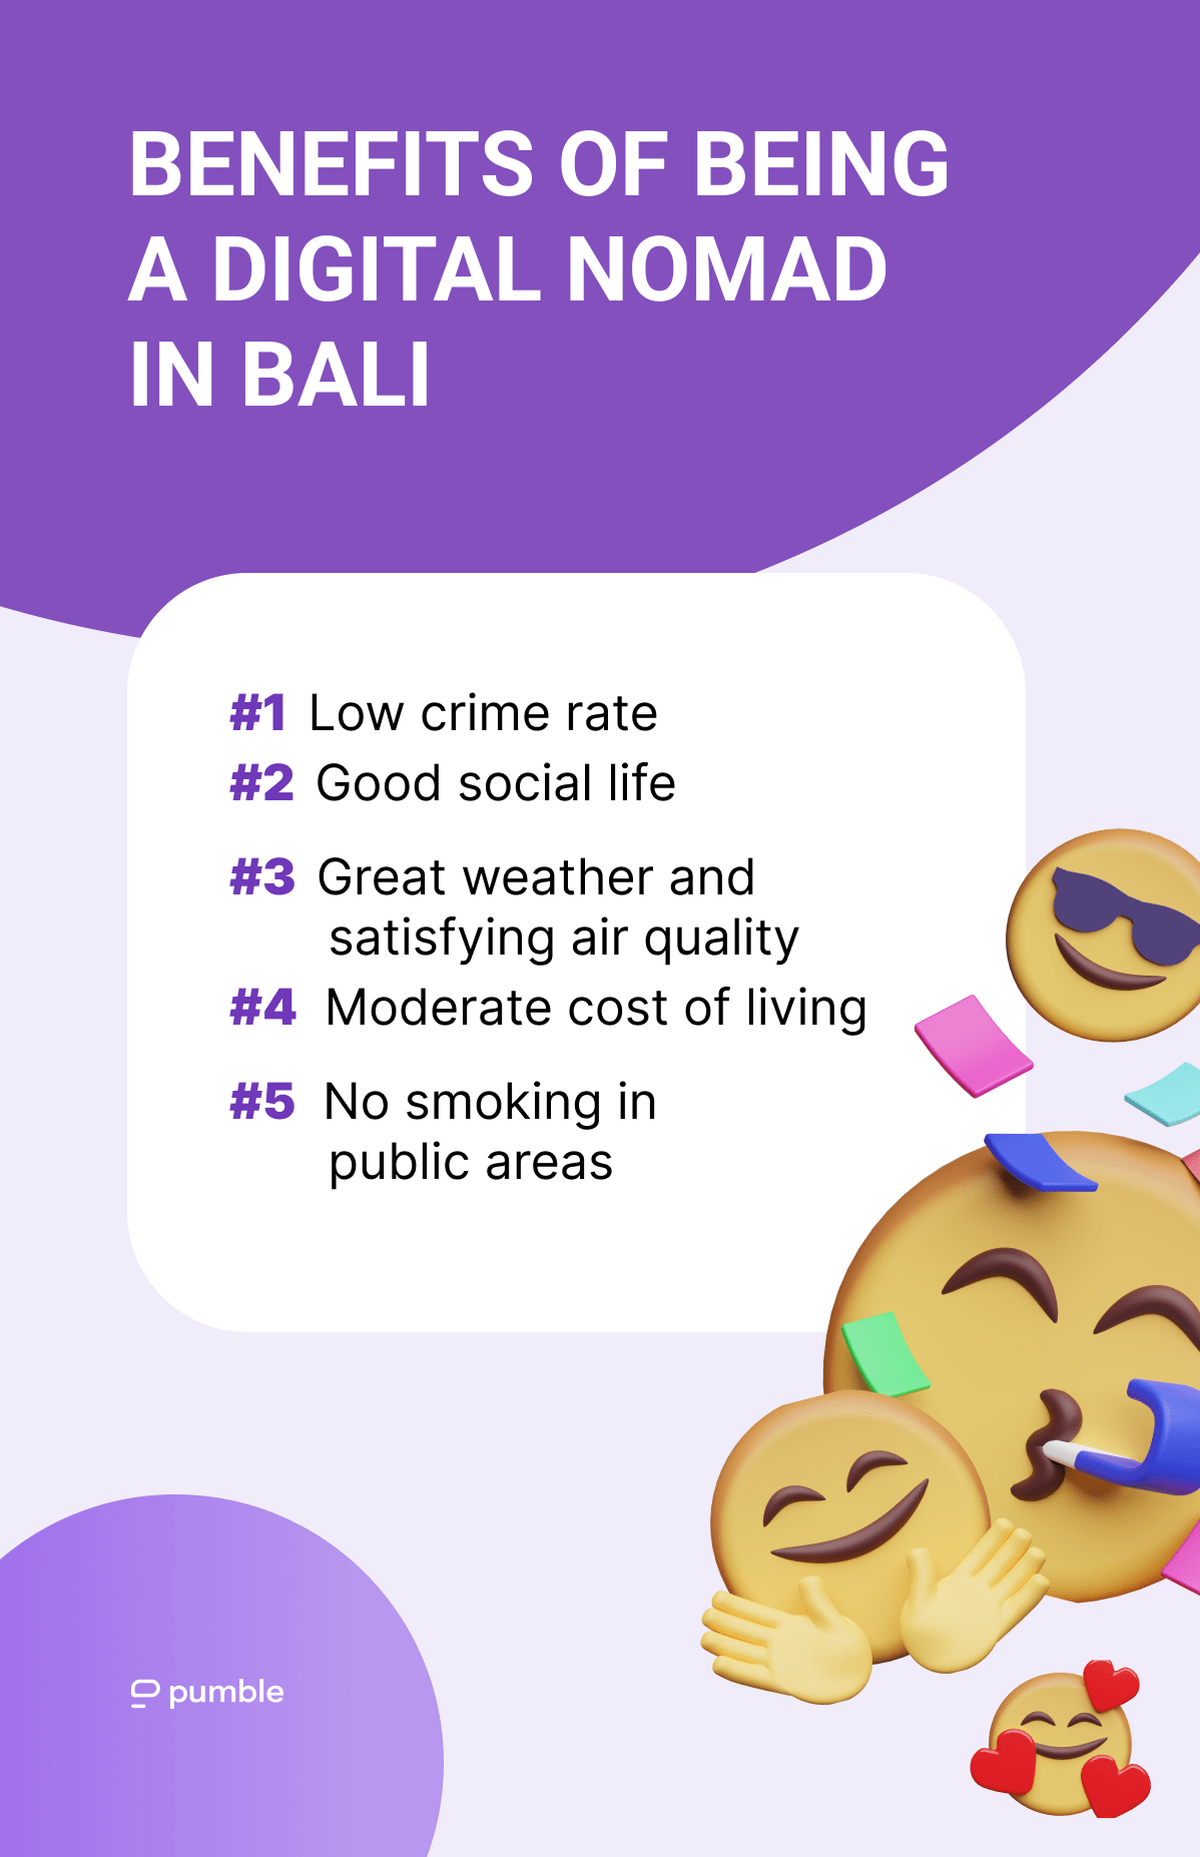 Benefits of being a DN in Bali